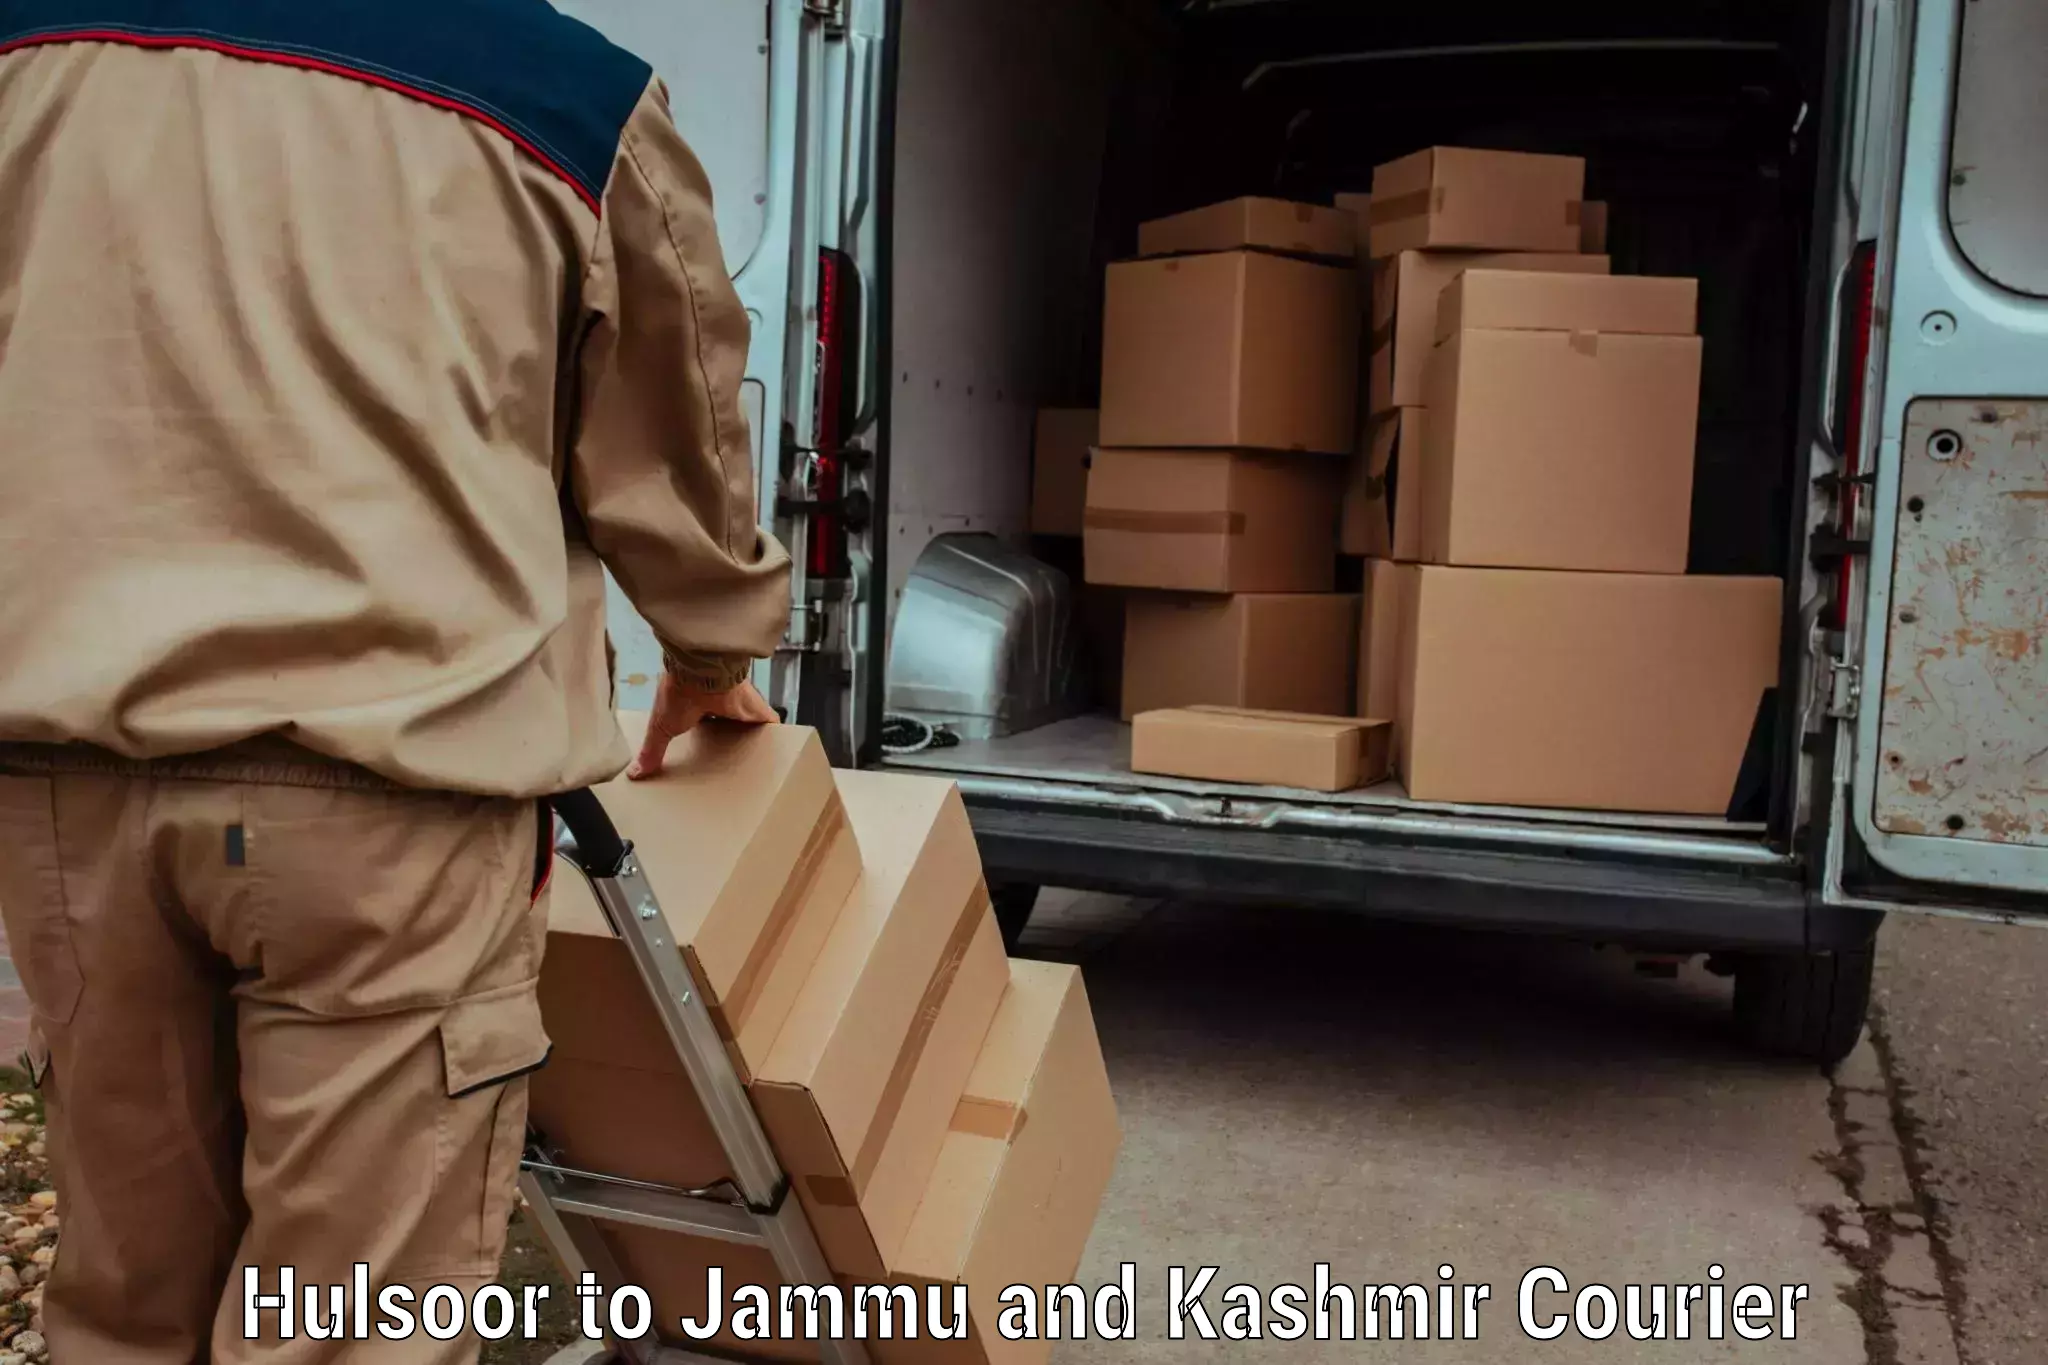 Luggage transport consulting Hulsoor to Jammu and Kashmir